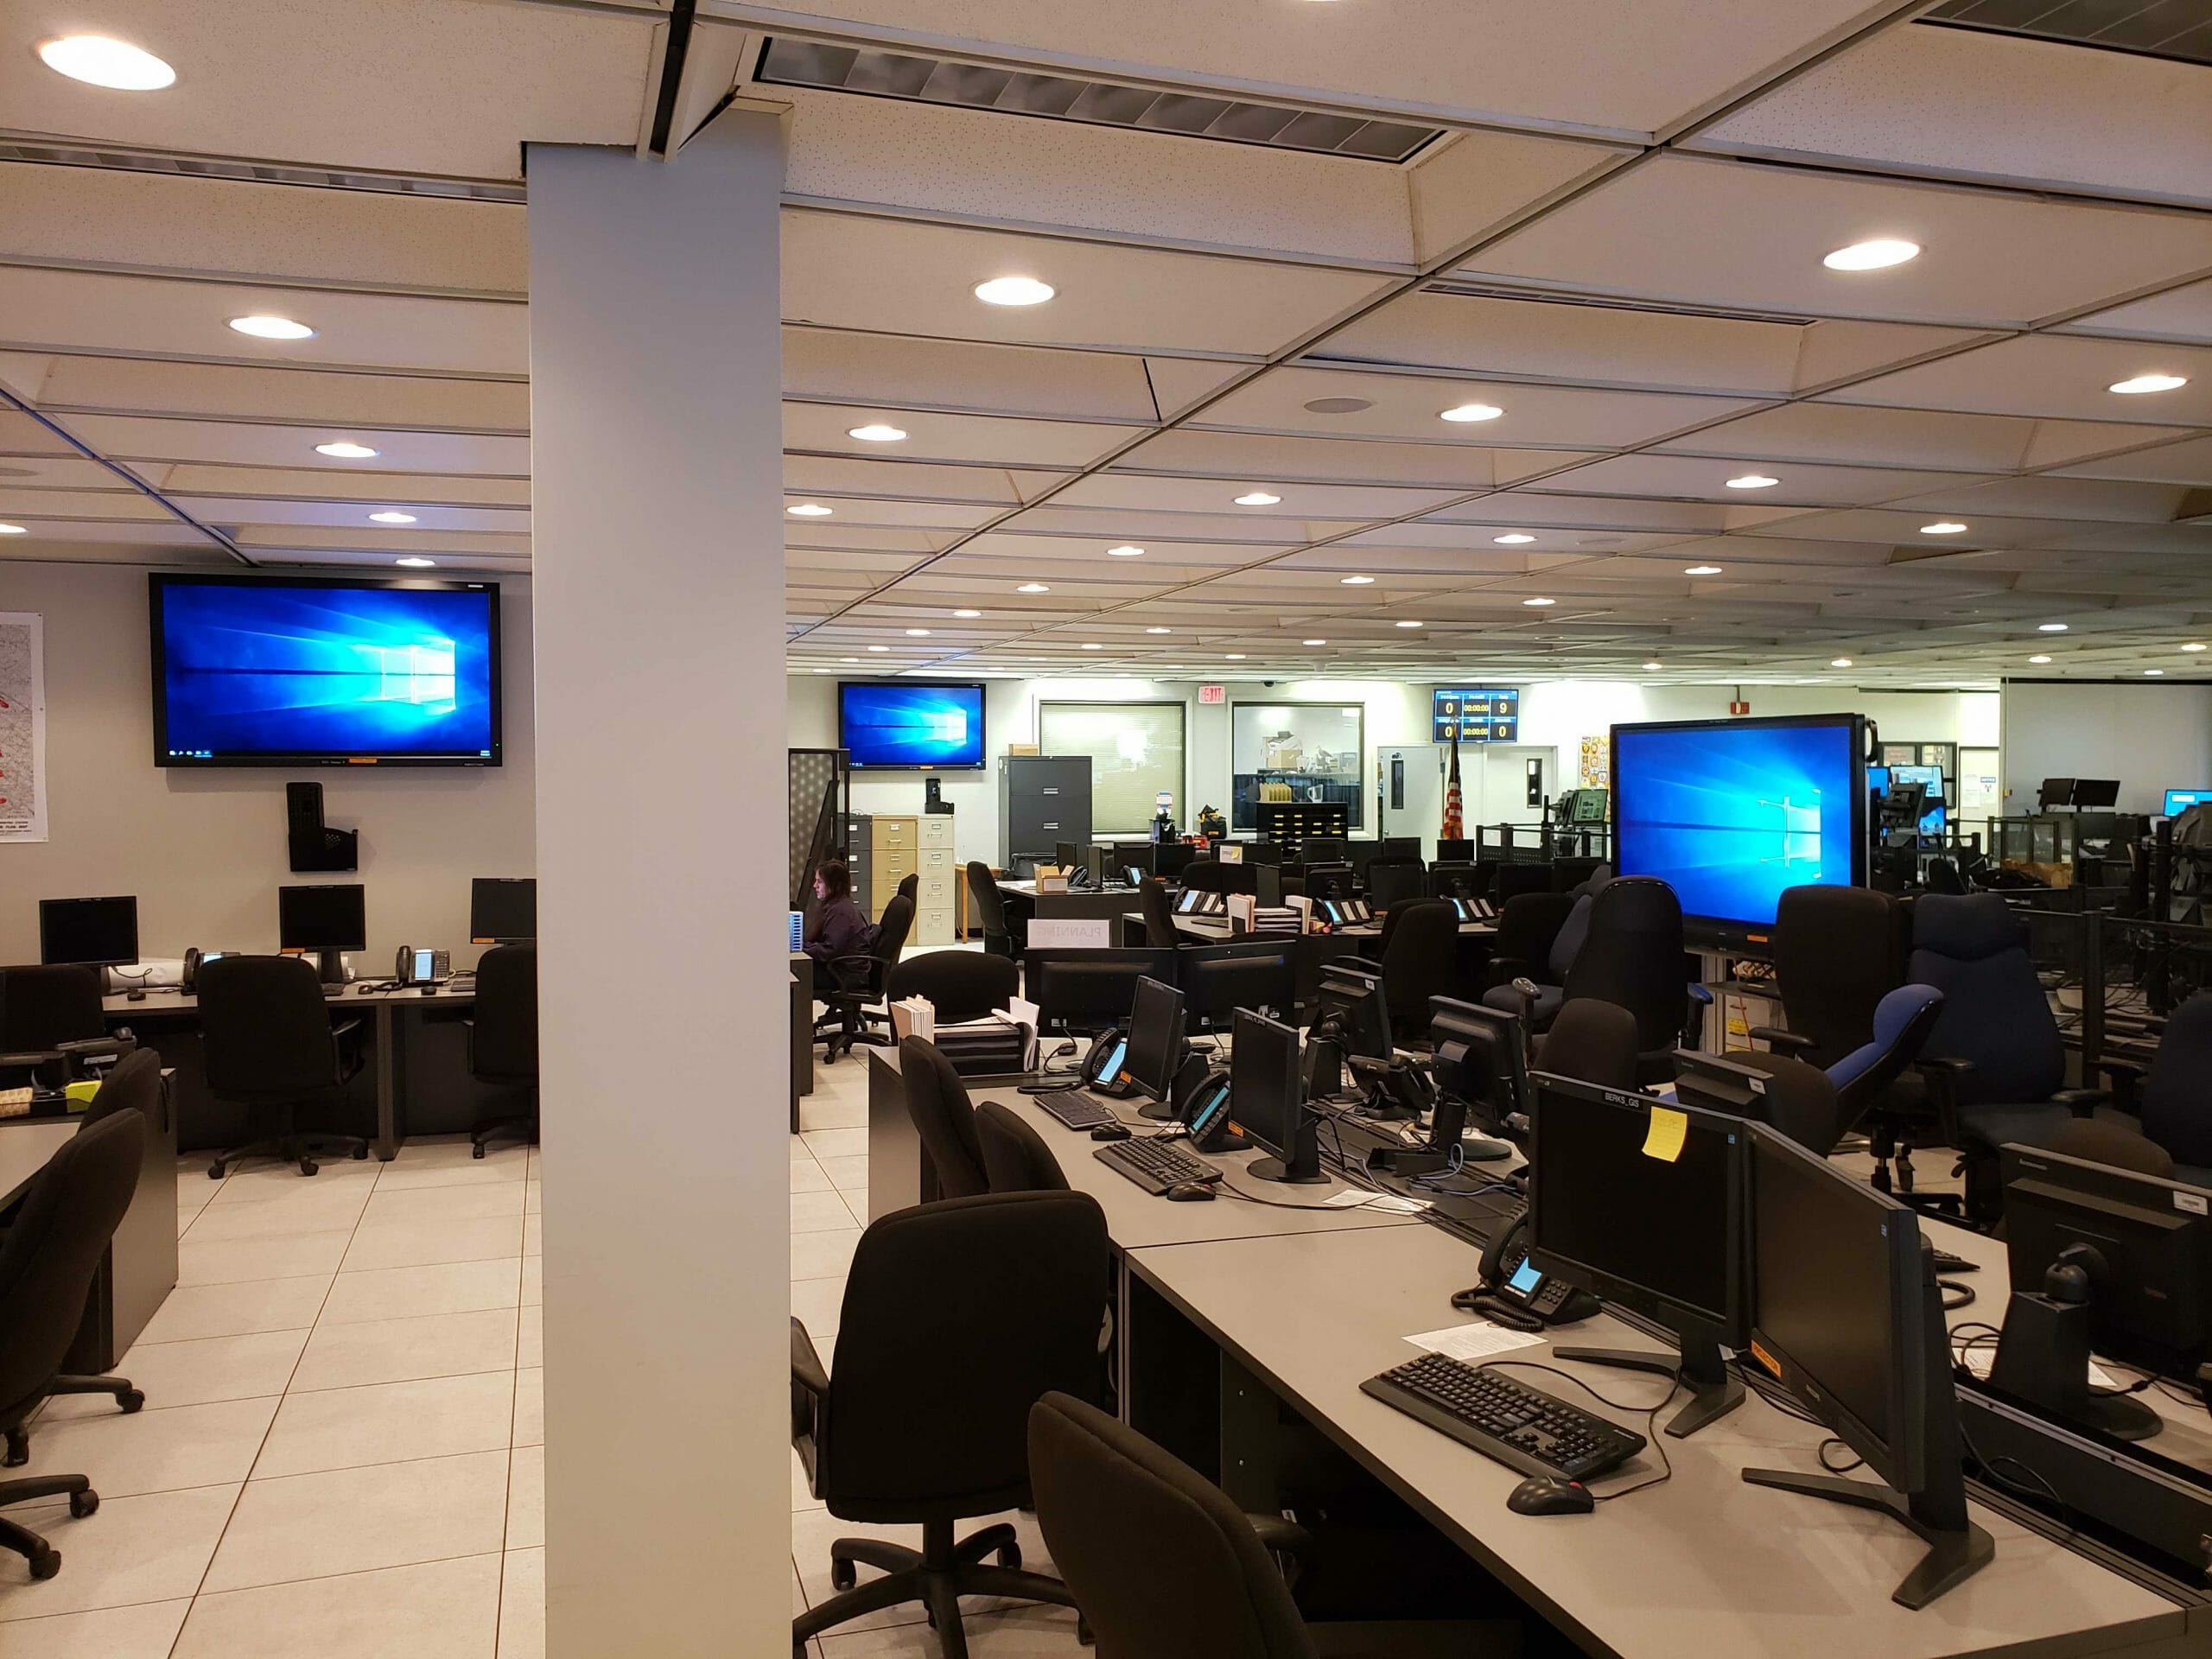 Video walls in an emergency operations center